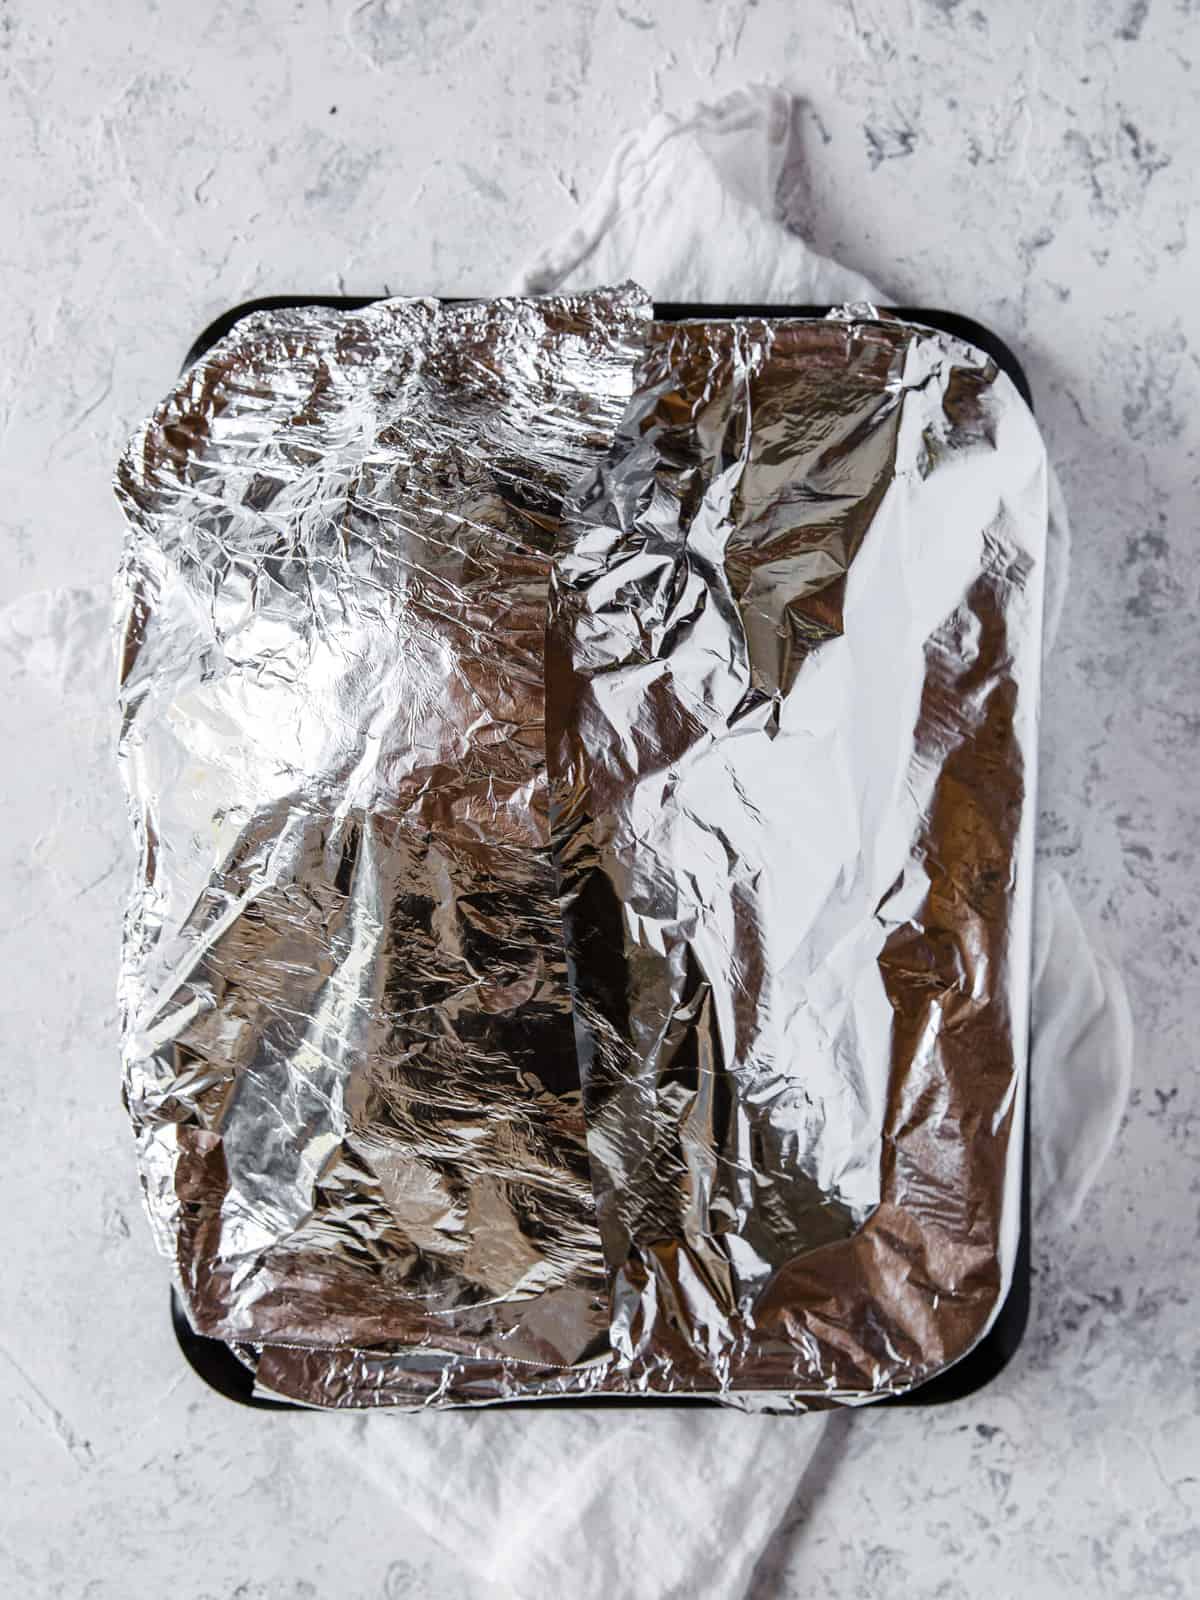 abon-in ham in a disposable aluminum baking dish, wrapped in foil, ready to go into the oven